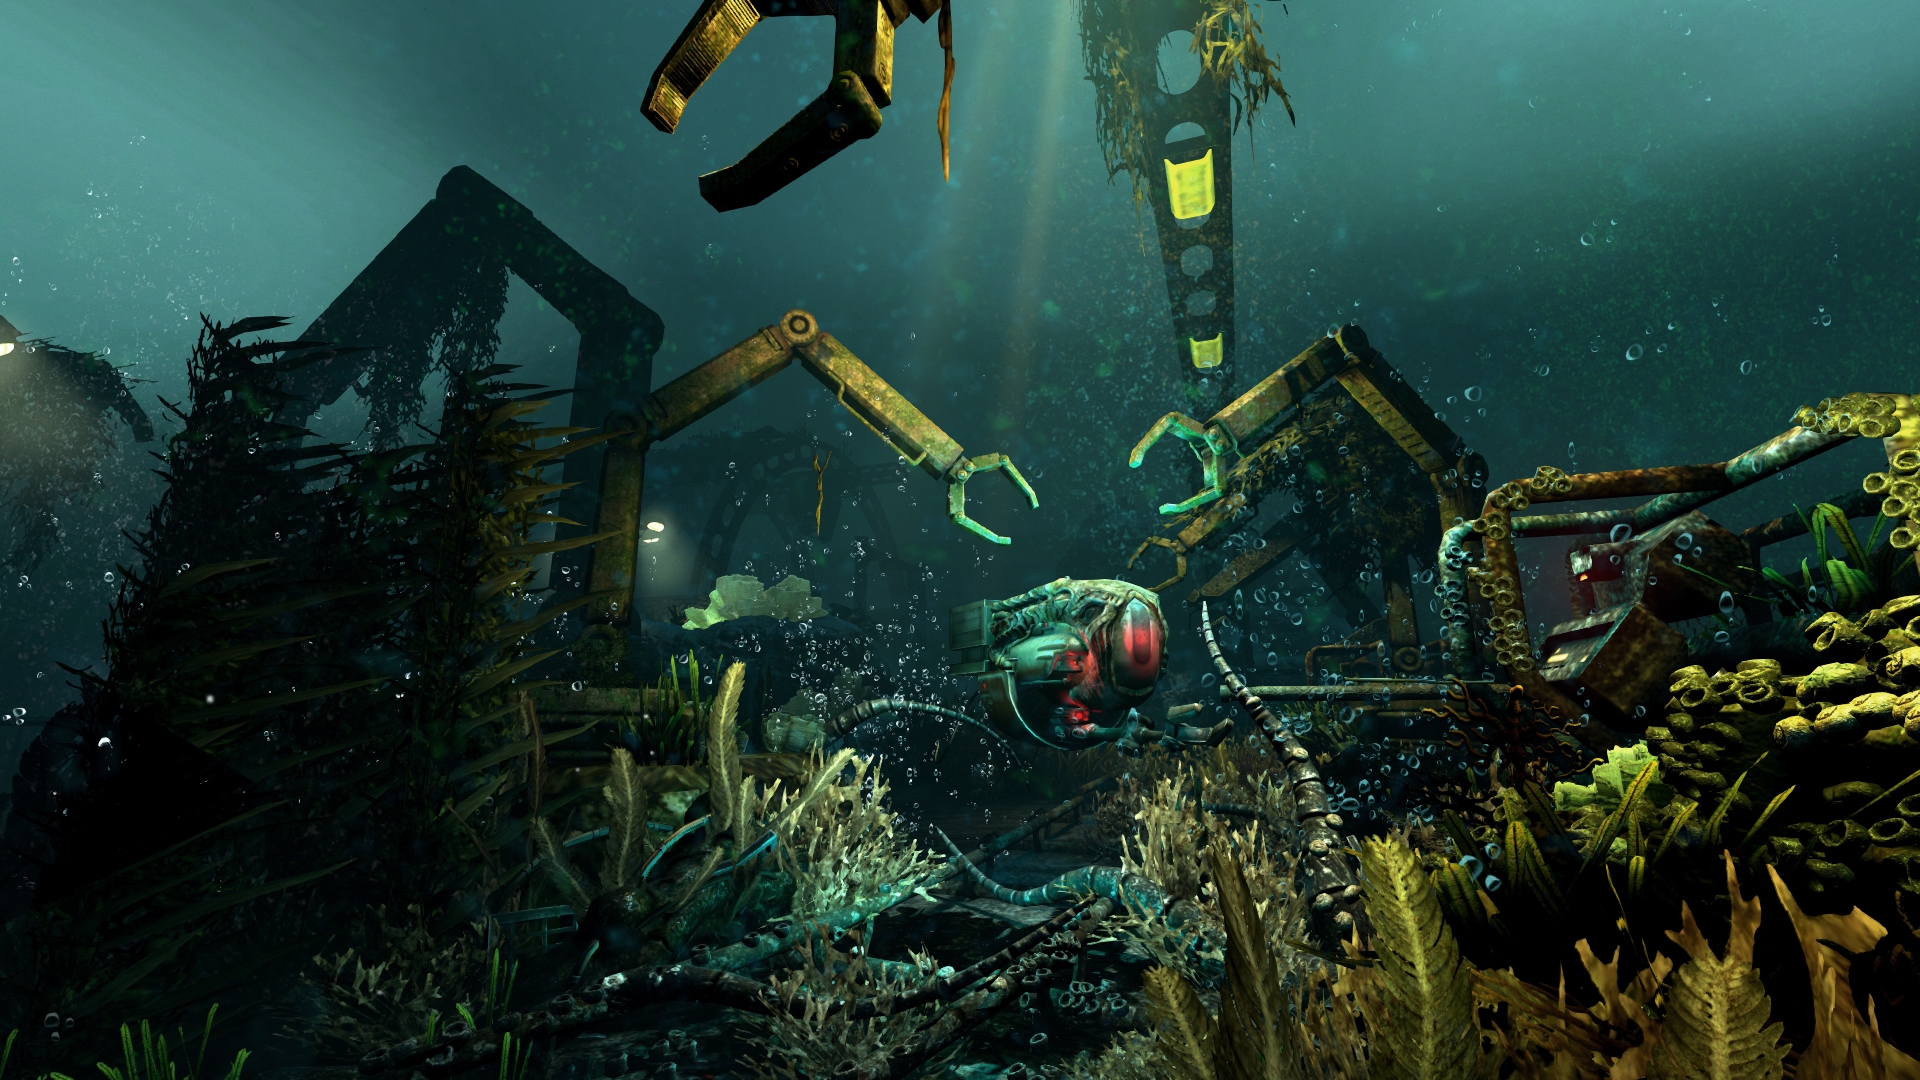 Several mechanical looking arms underwater among some coral and plants. A mechanic like suit with a small hand attached floats beneath.